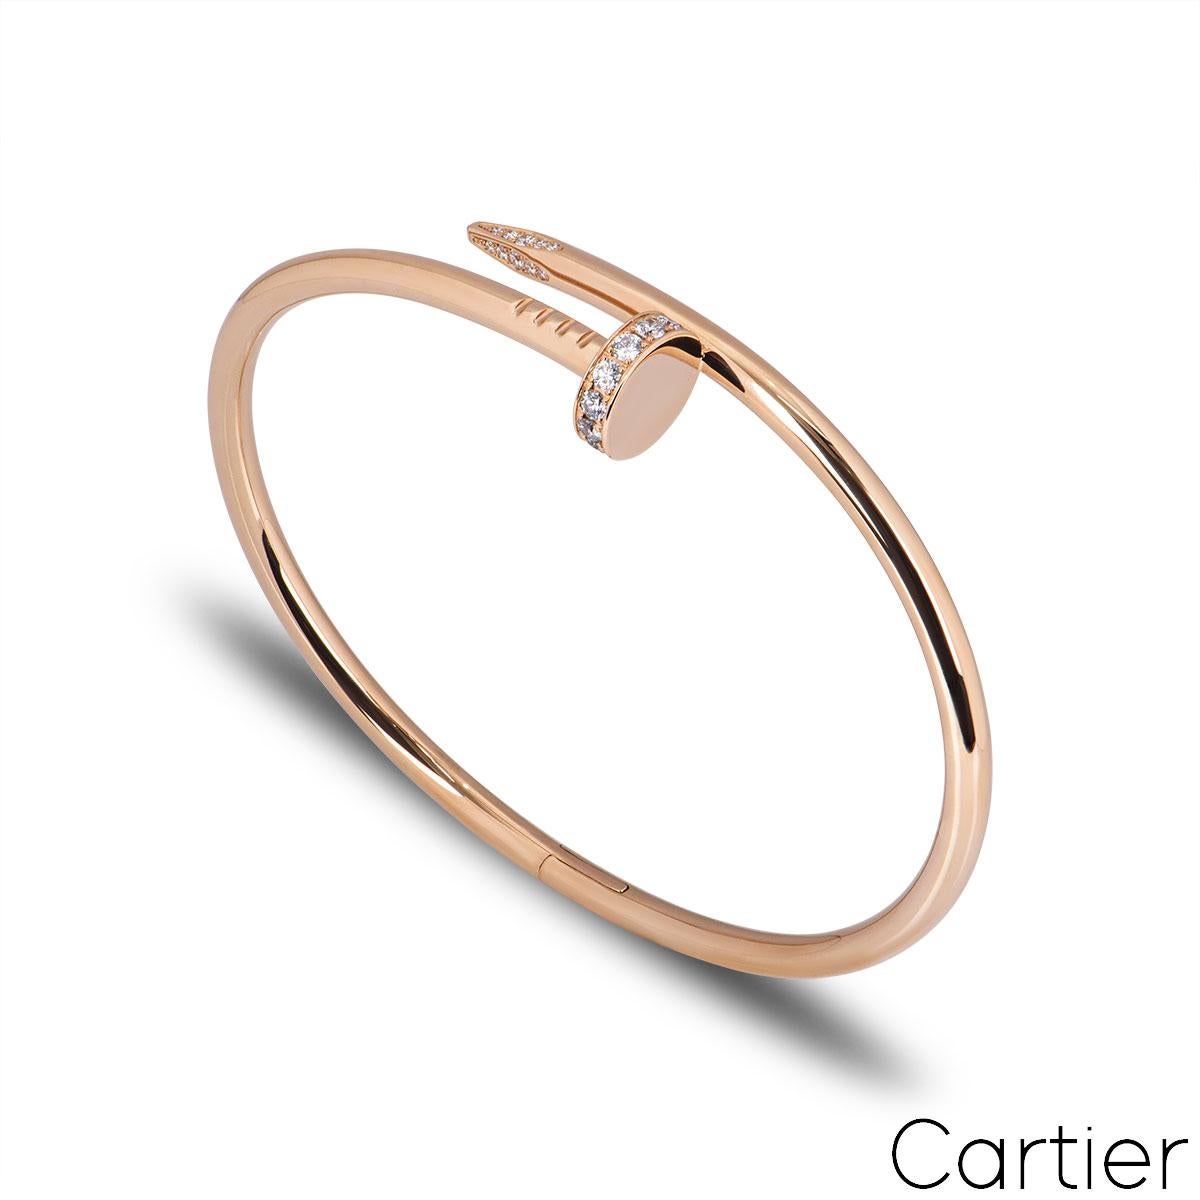 An 18k rose gold Cartier diamond bracelet from the Juste Un Clou collection. The bracelet is in the style of a nail and has 32 round brilliant cut pave diamonds set in the head and tip, totalling 0.58ct. The diamonds are predominantly F colour and